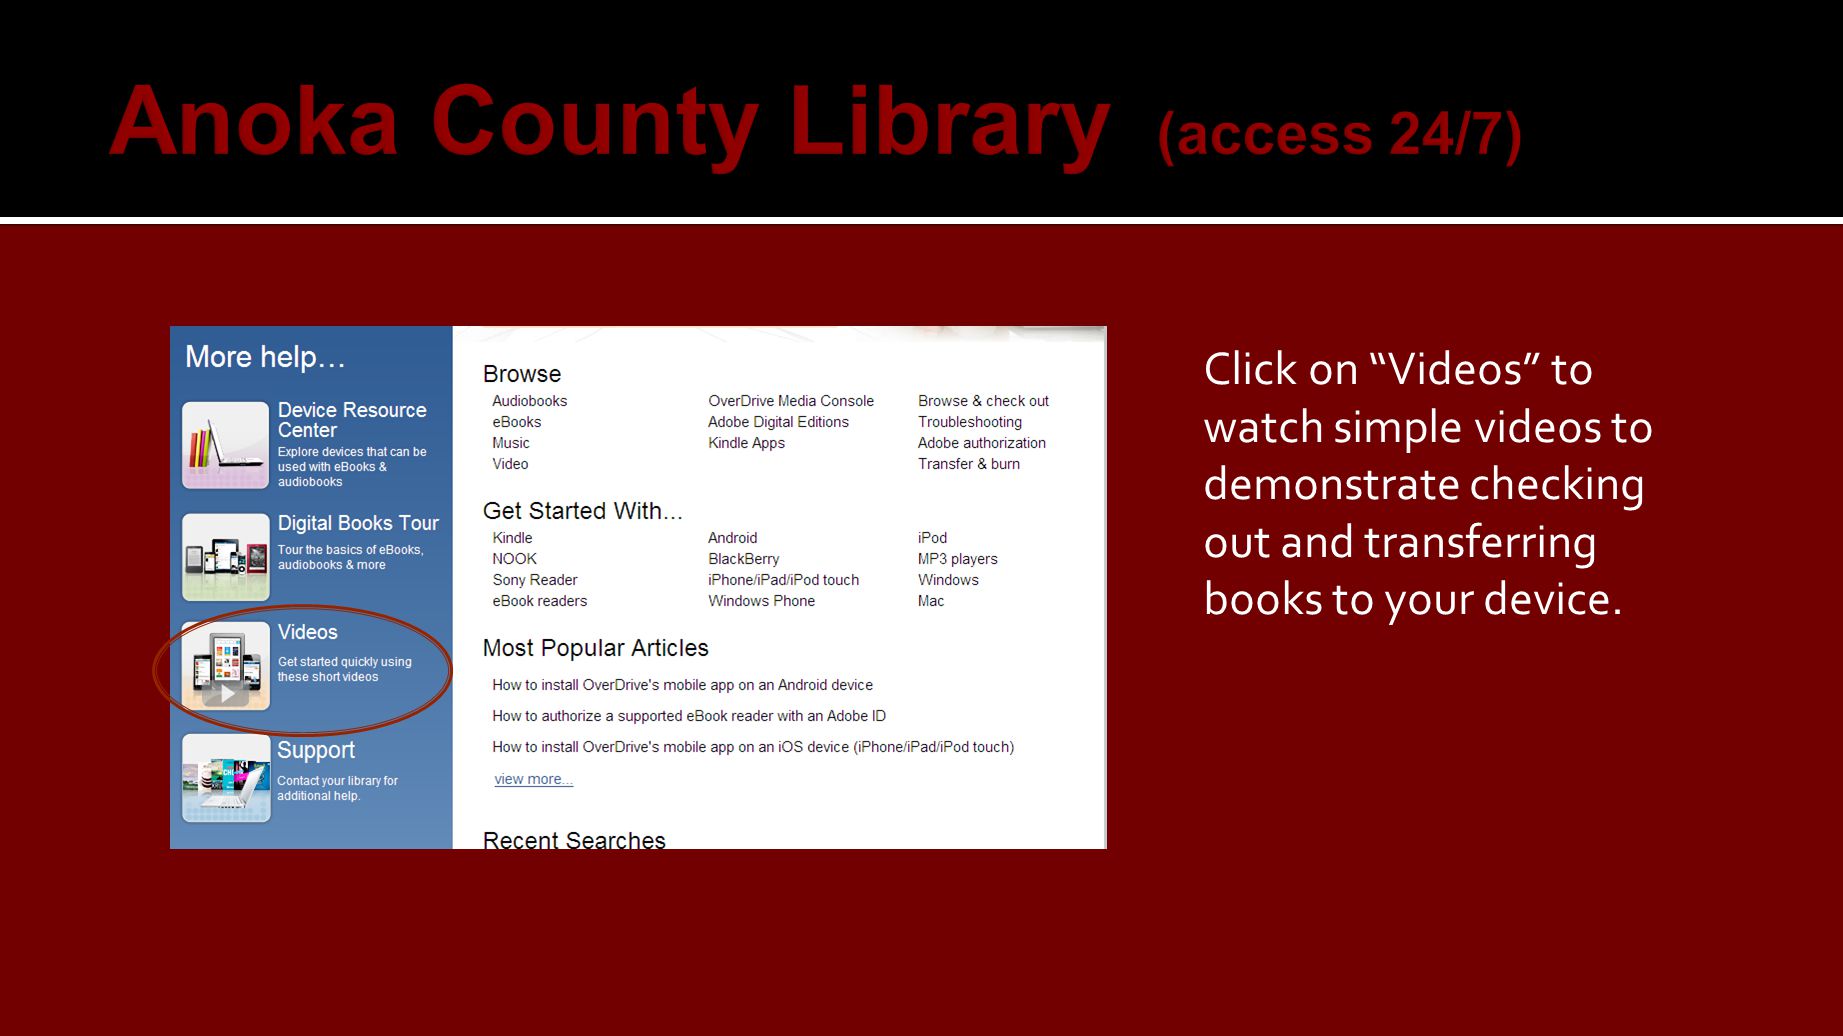 Click on Videos to watch simple videos to demonstrate checking out and transferring books to your device.